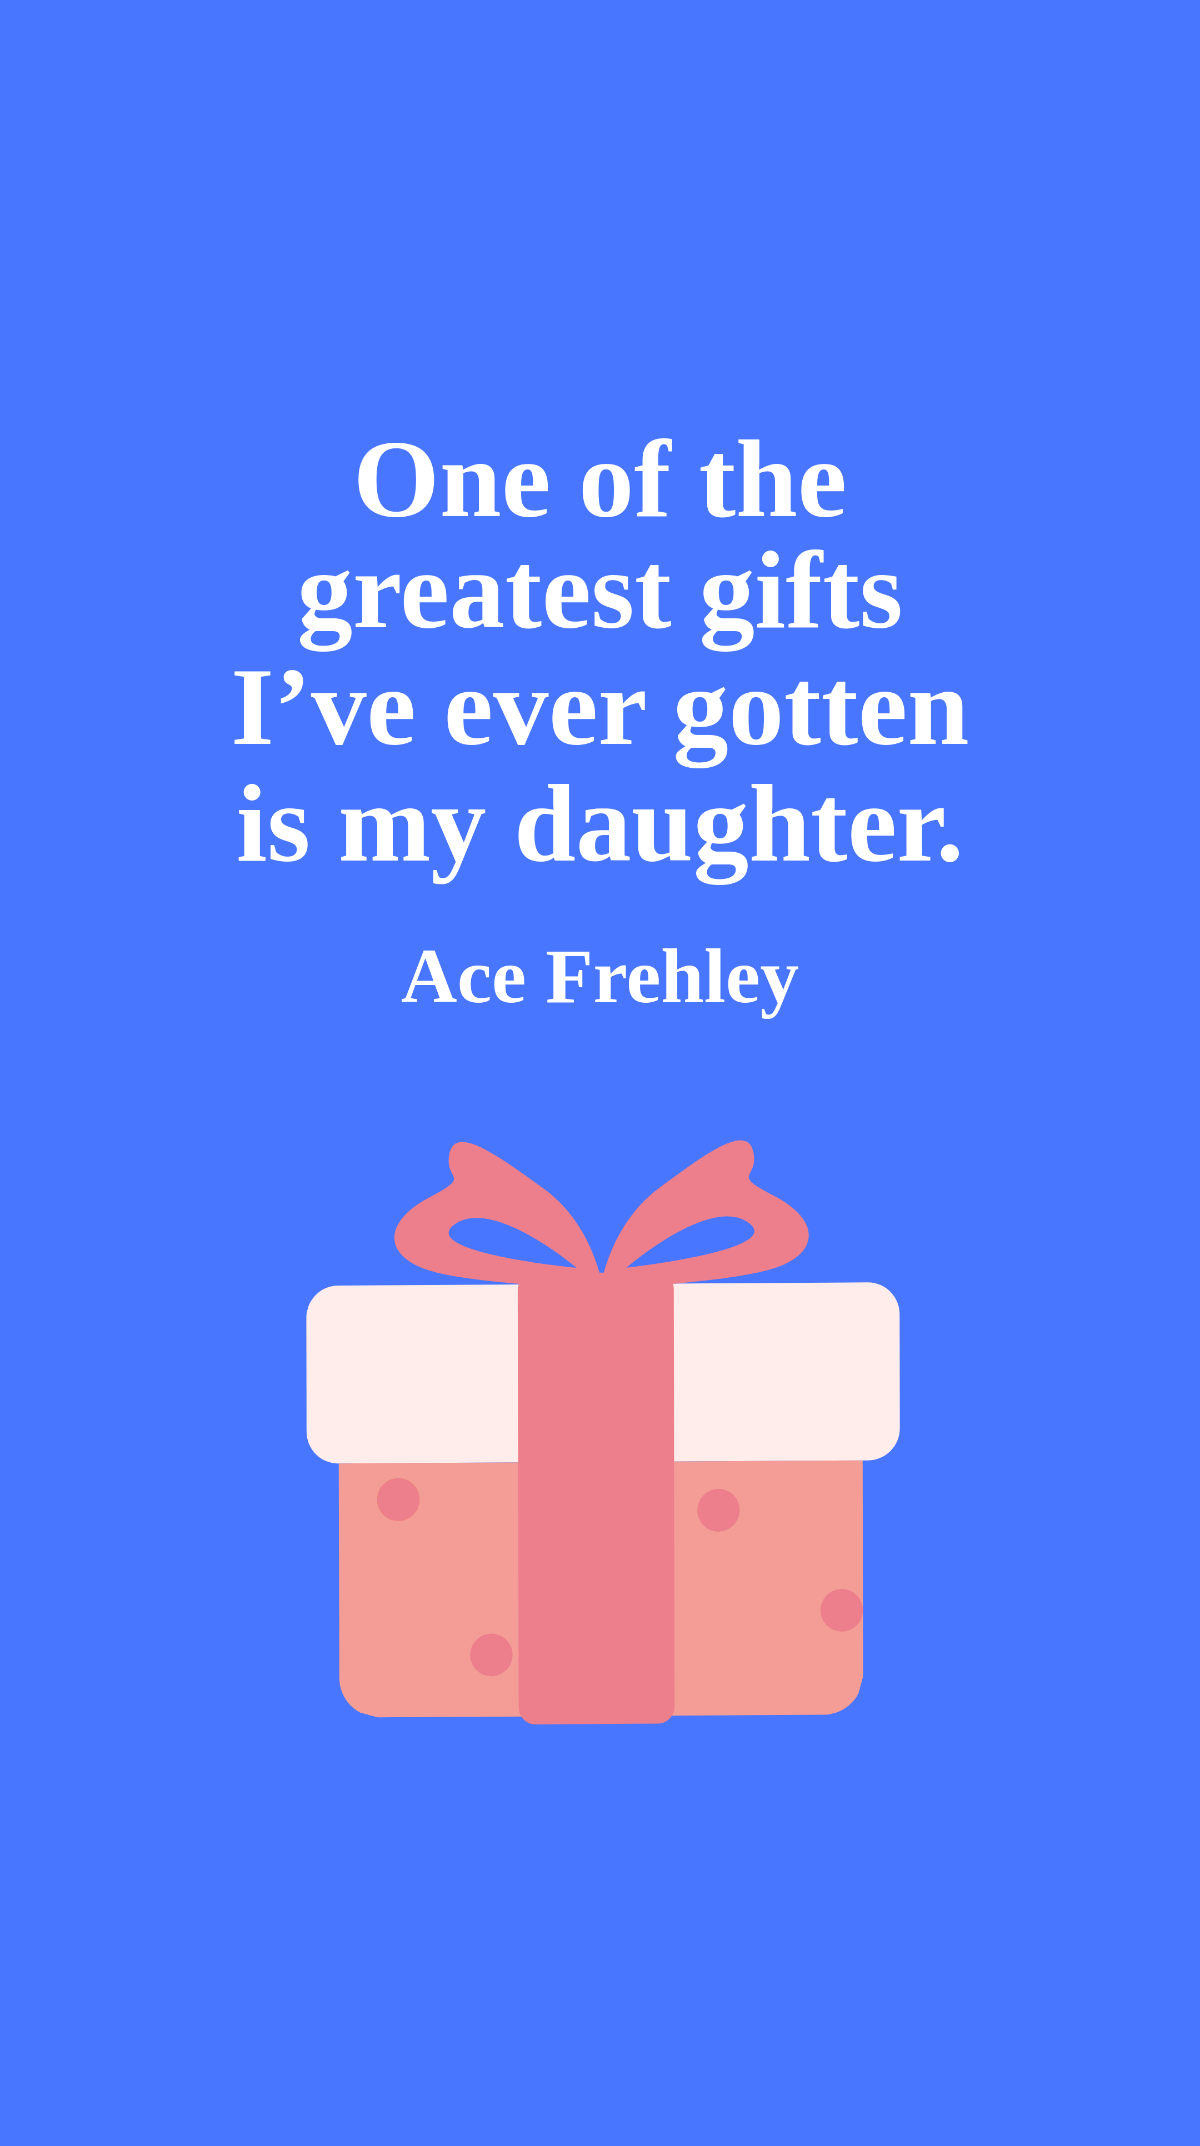 Free Ace Frehley - One of the greatest gifts I’ve ever gotten is my daughter. Template